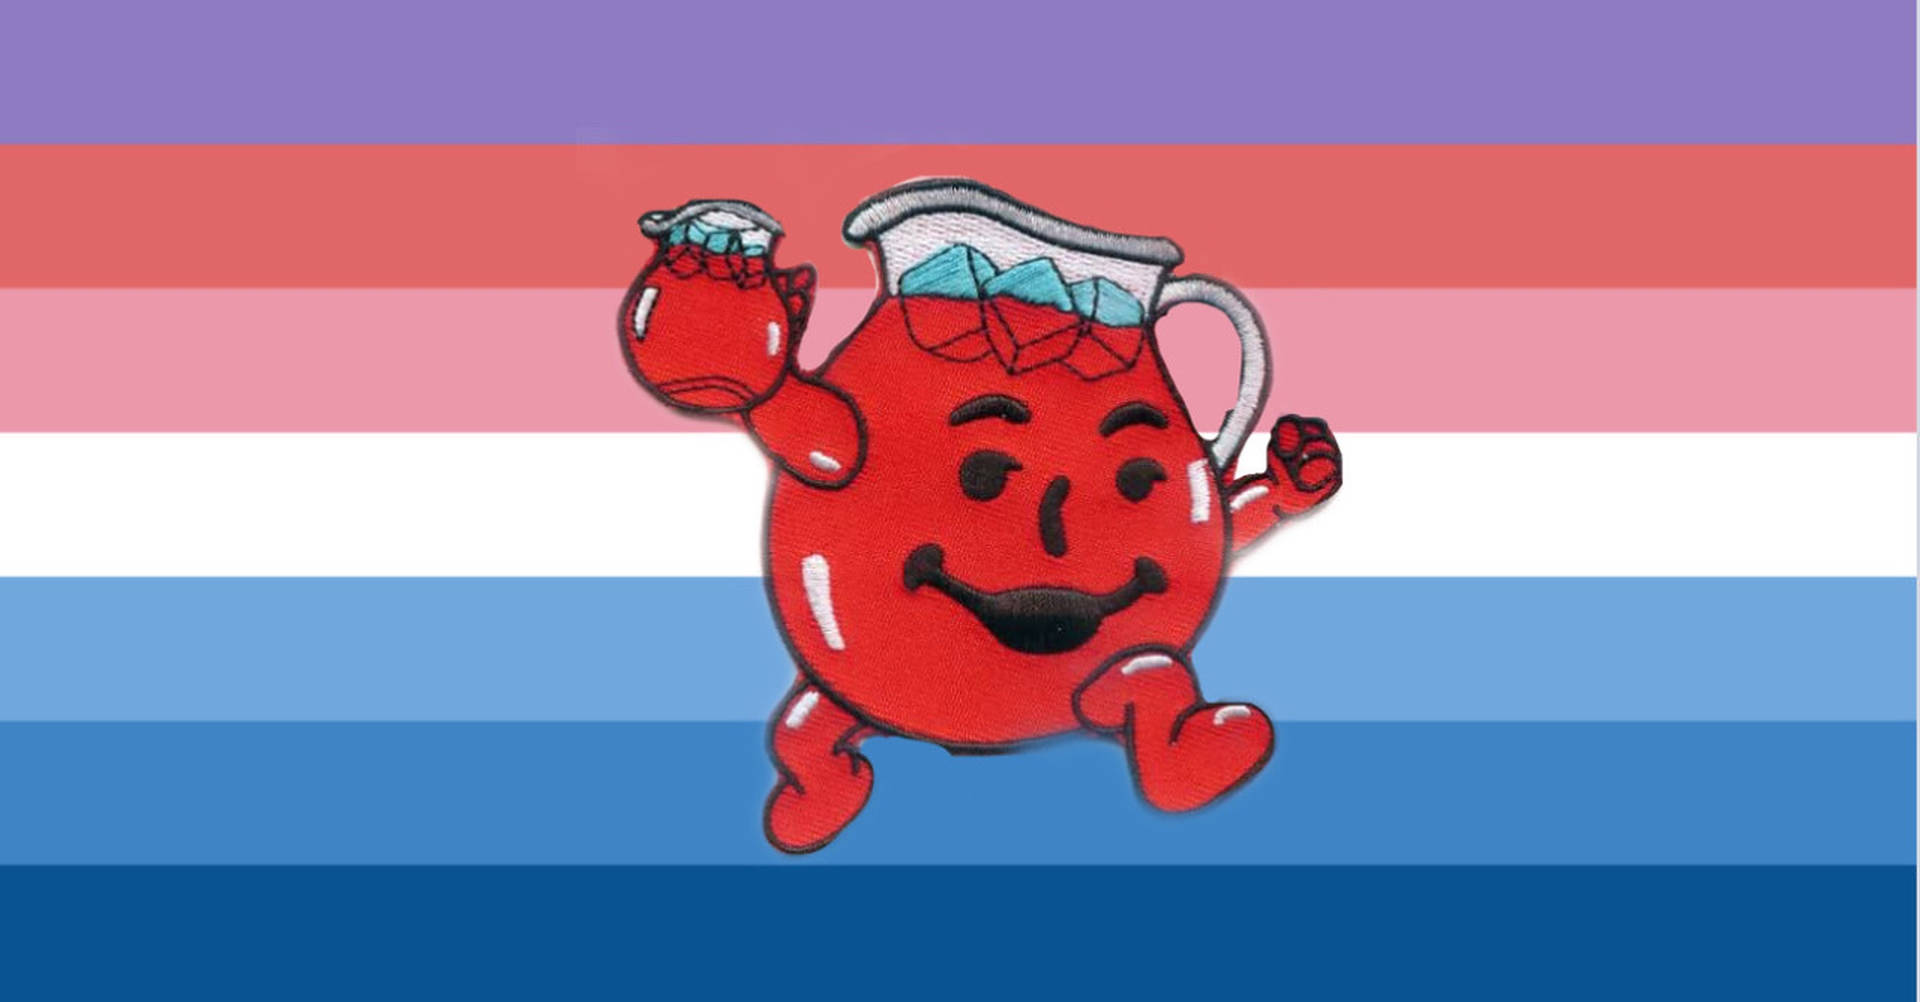 Kool Aid Man Against Colorful Wall Background